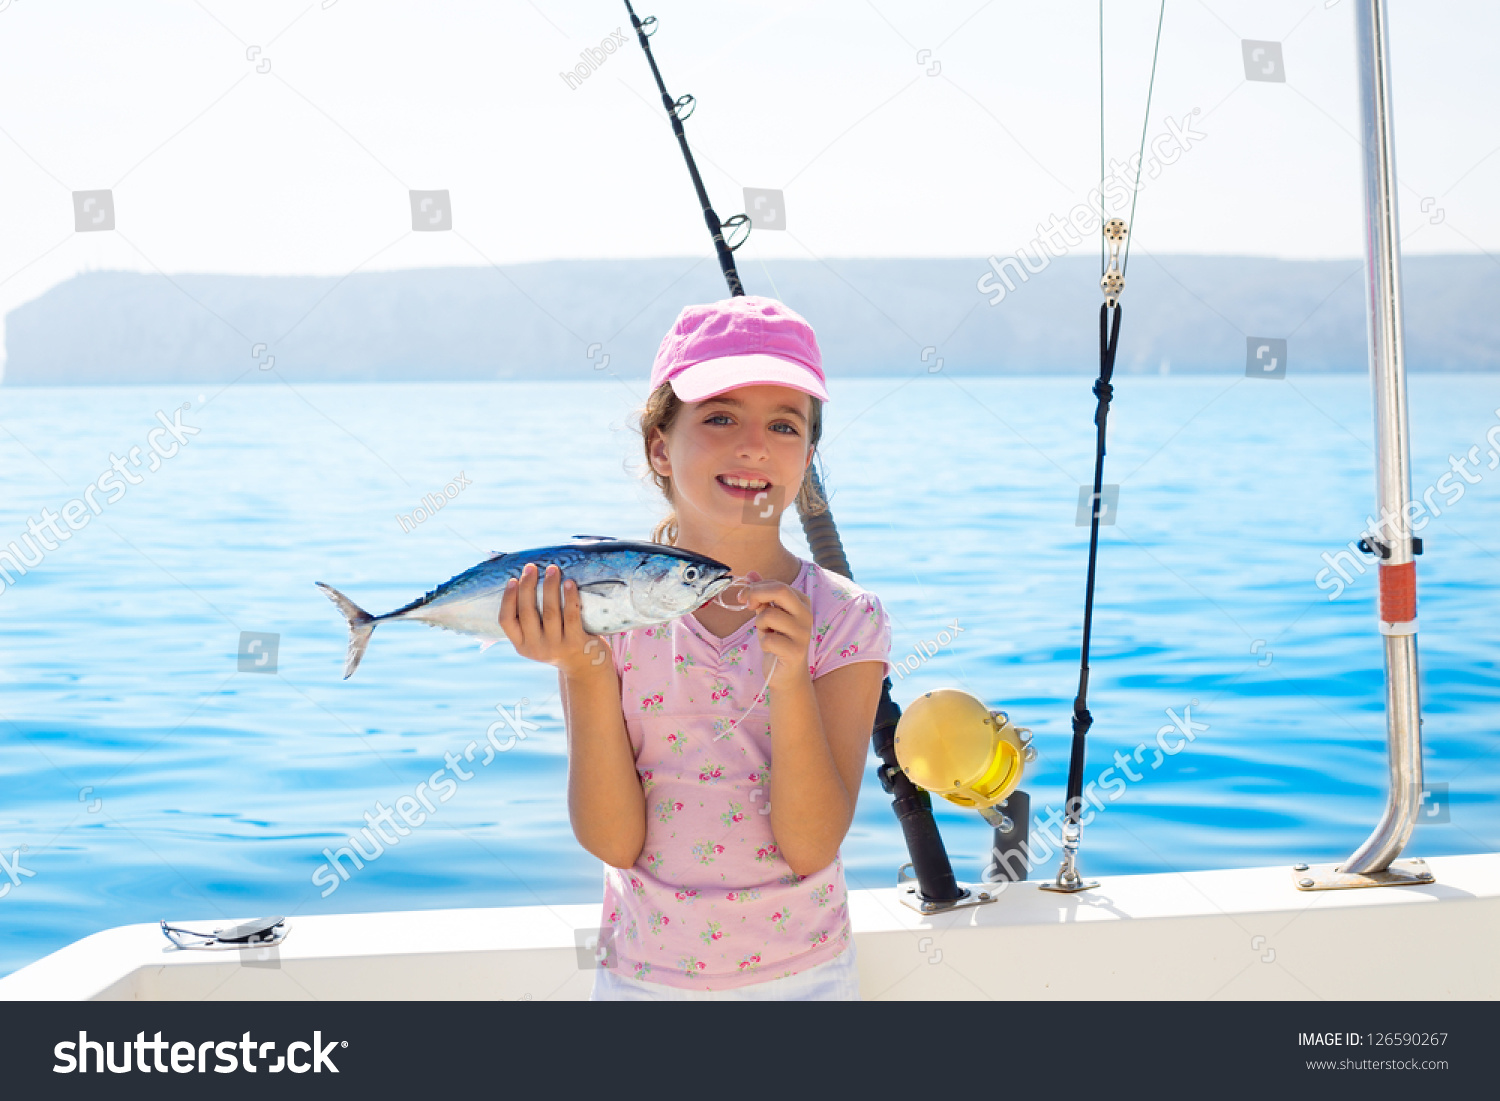 stock-photo-child-little-girl-fishing-in-boat-holding-little-tunny-tuna-fish-catch-with-rod-and-trolling-reels-126590267.jpg